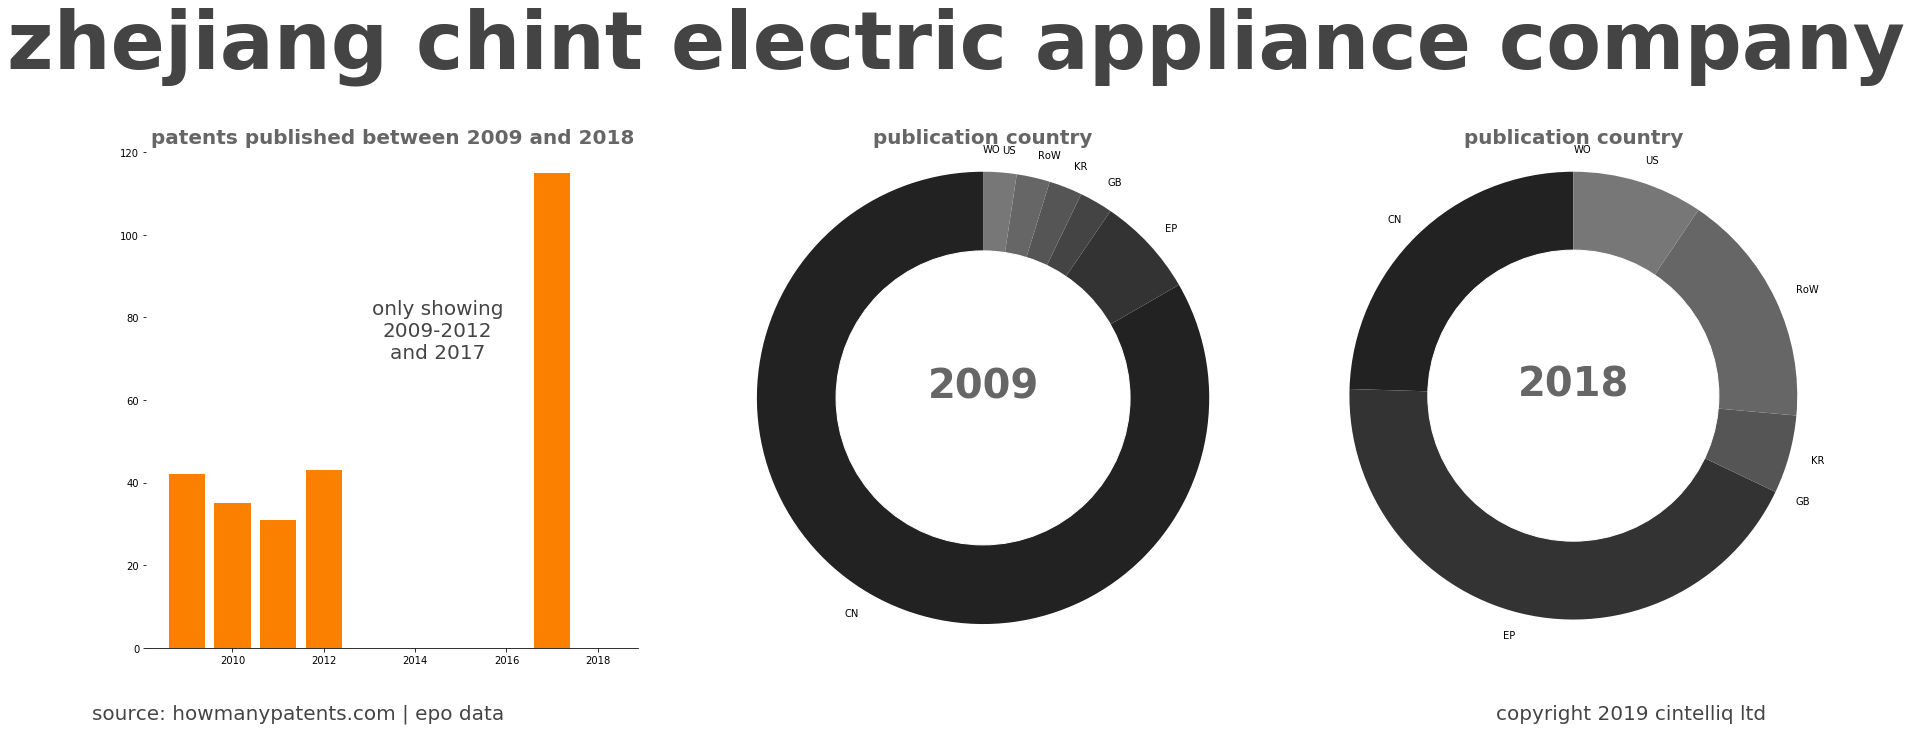 summary of patents for Zhejiang Chint Electric Appliance Company